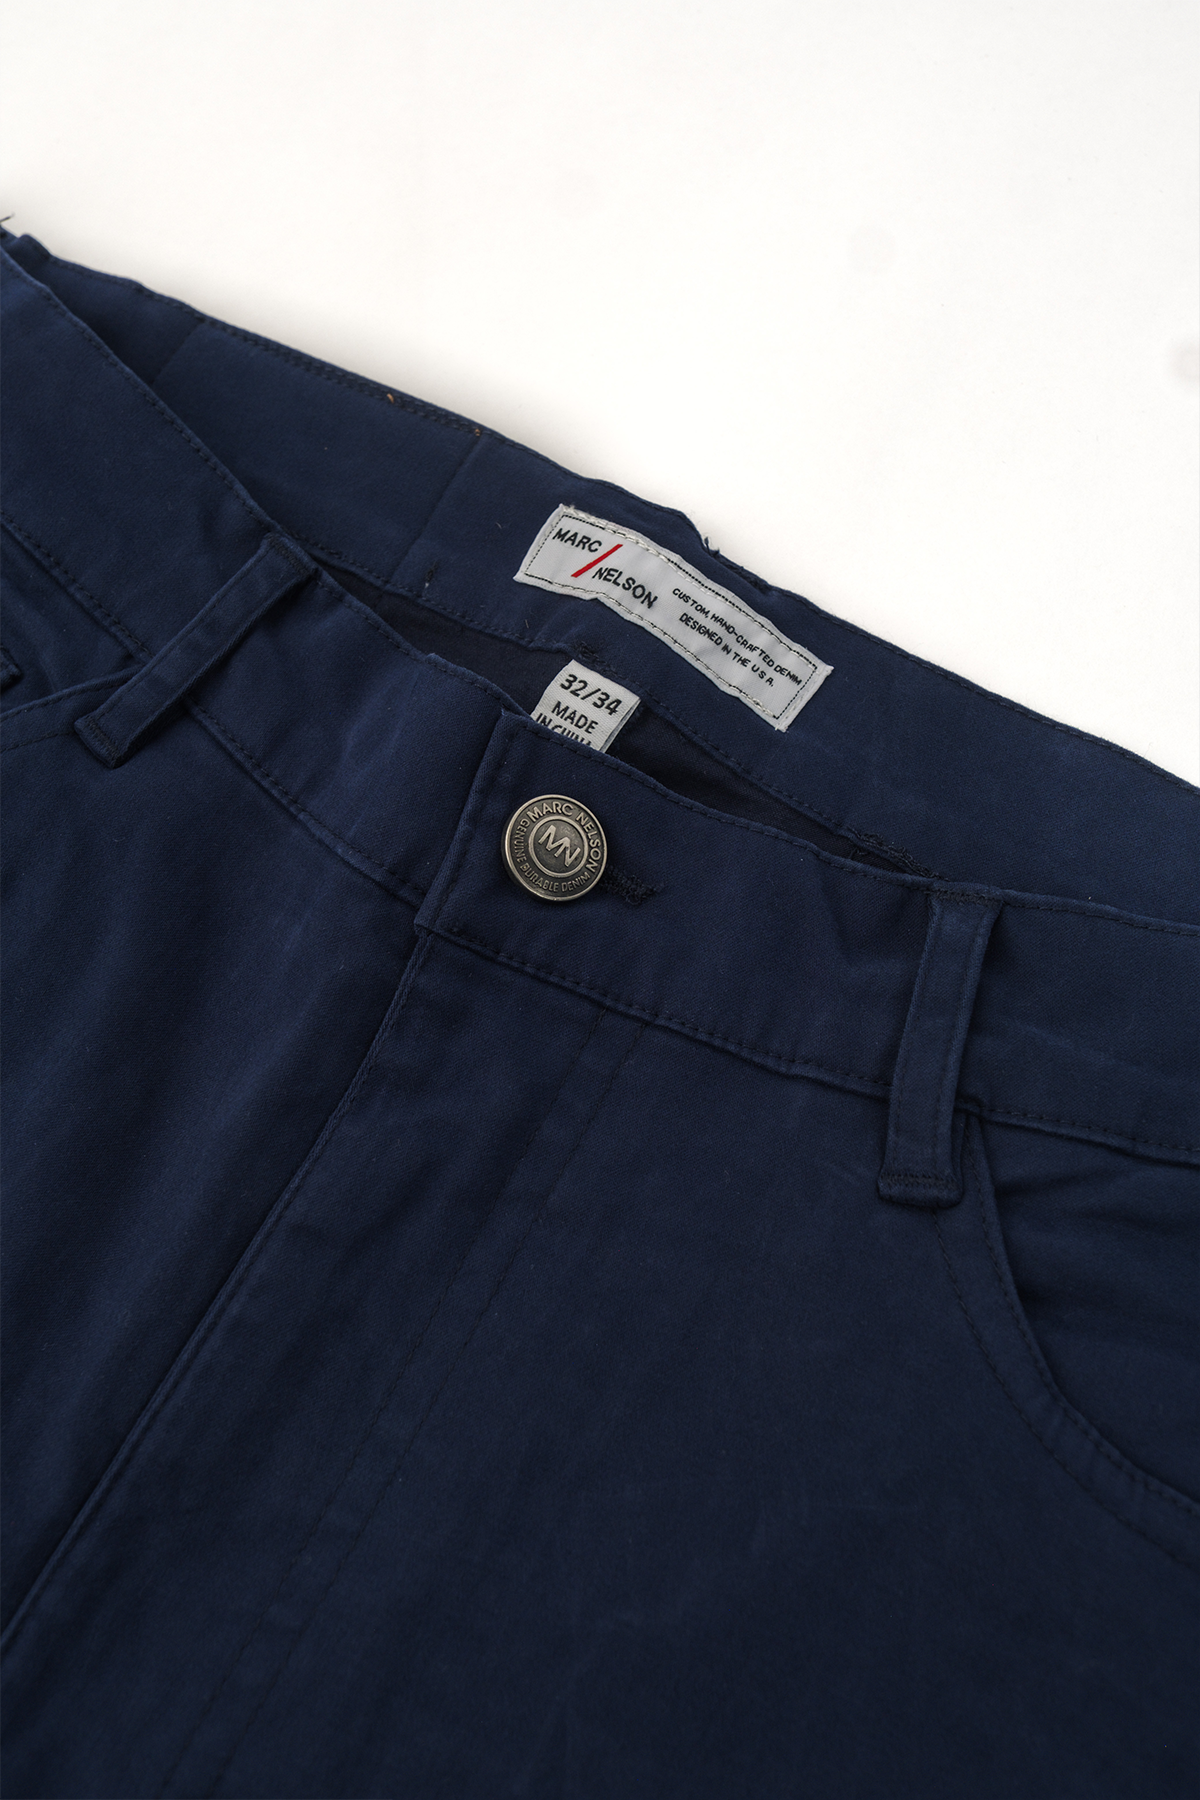 Close up photo of the frontside of the George Navy Pants focusing on the details of the button and the waist tag. 